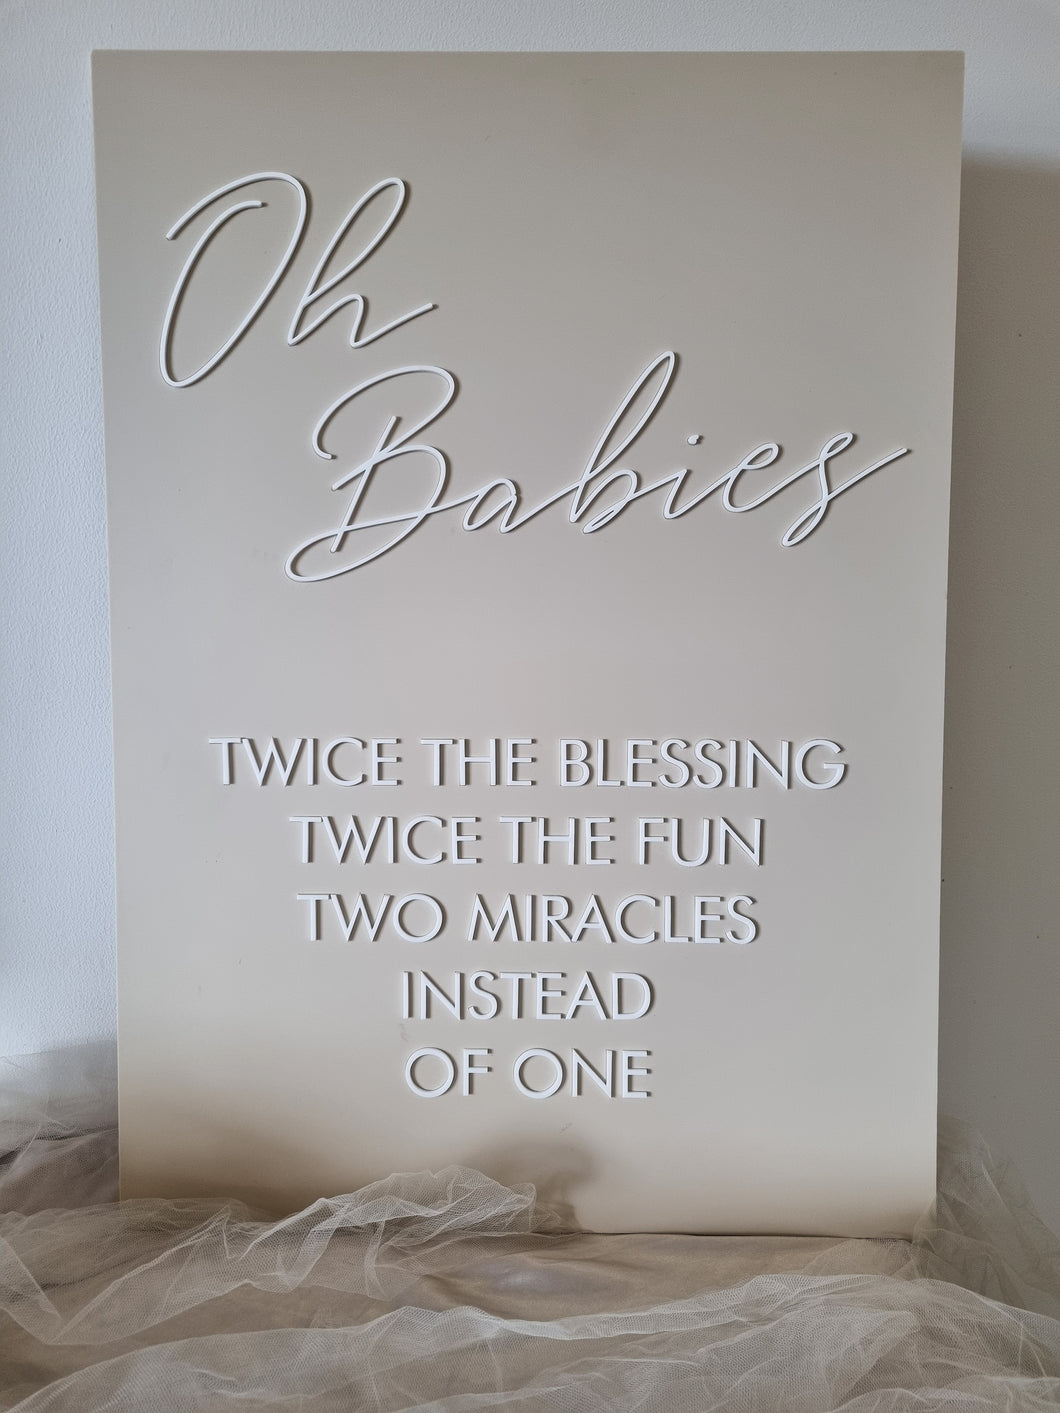 OH BABIES - BABY SHOWER / SPRINKLE SIGN